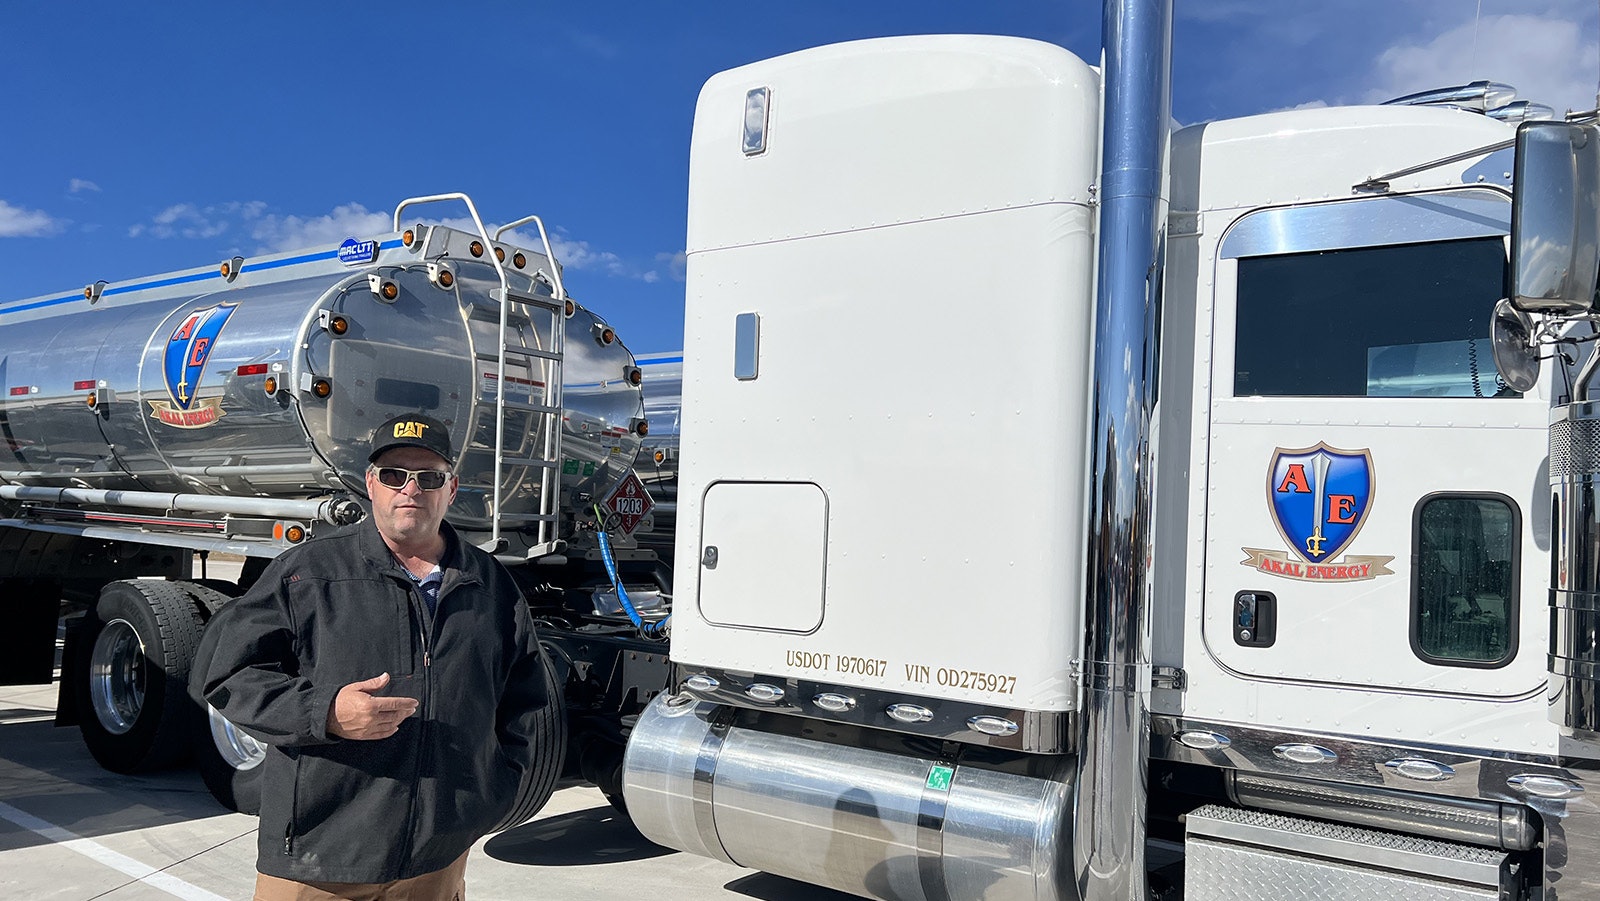 Truck driver David Nichols frequently travels the notorious “Snow Chi Mihn Trail” stretch of Interstate 80 between Rawlins and Laramie. He’s grateful to see a new resting lot for truckers open just off the Quealy Dome exit.